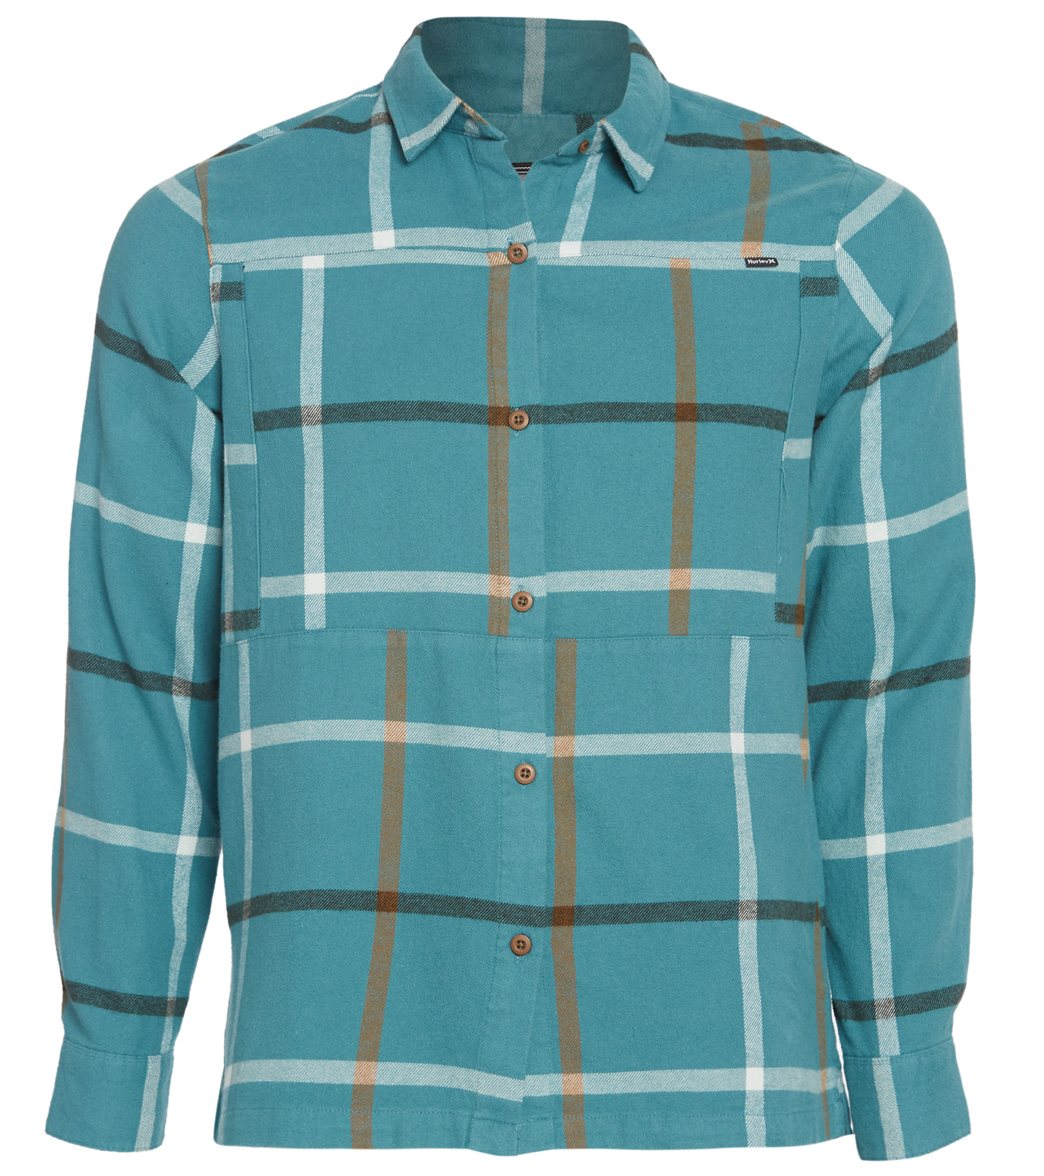 Hurley Wilson Flannel Long Sleeve Shirt - Mineral Teal Large Cotton - Swimoutlet.com